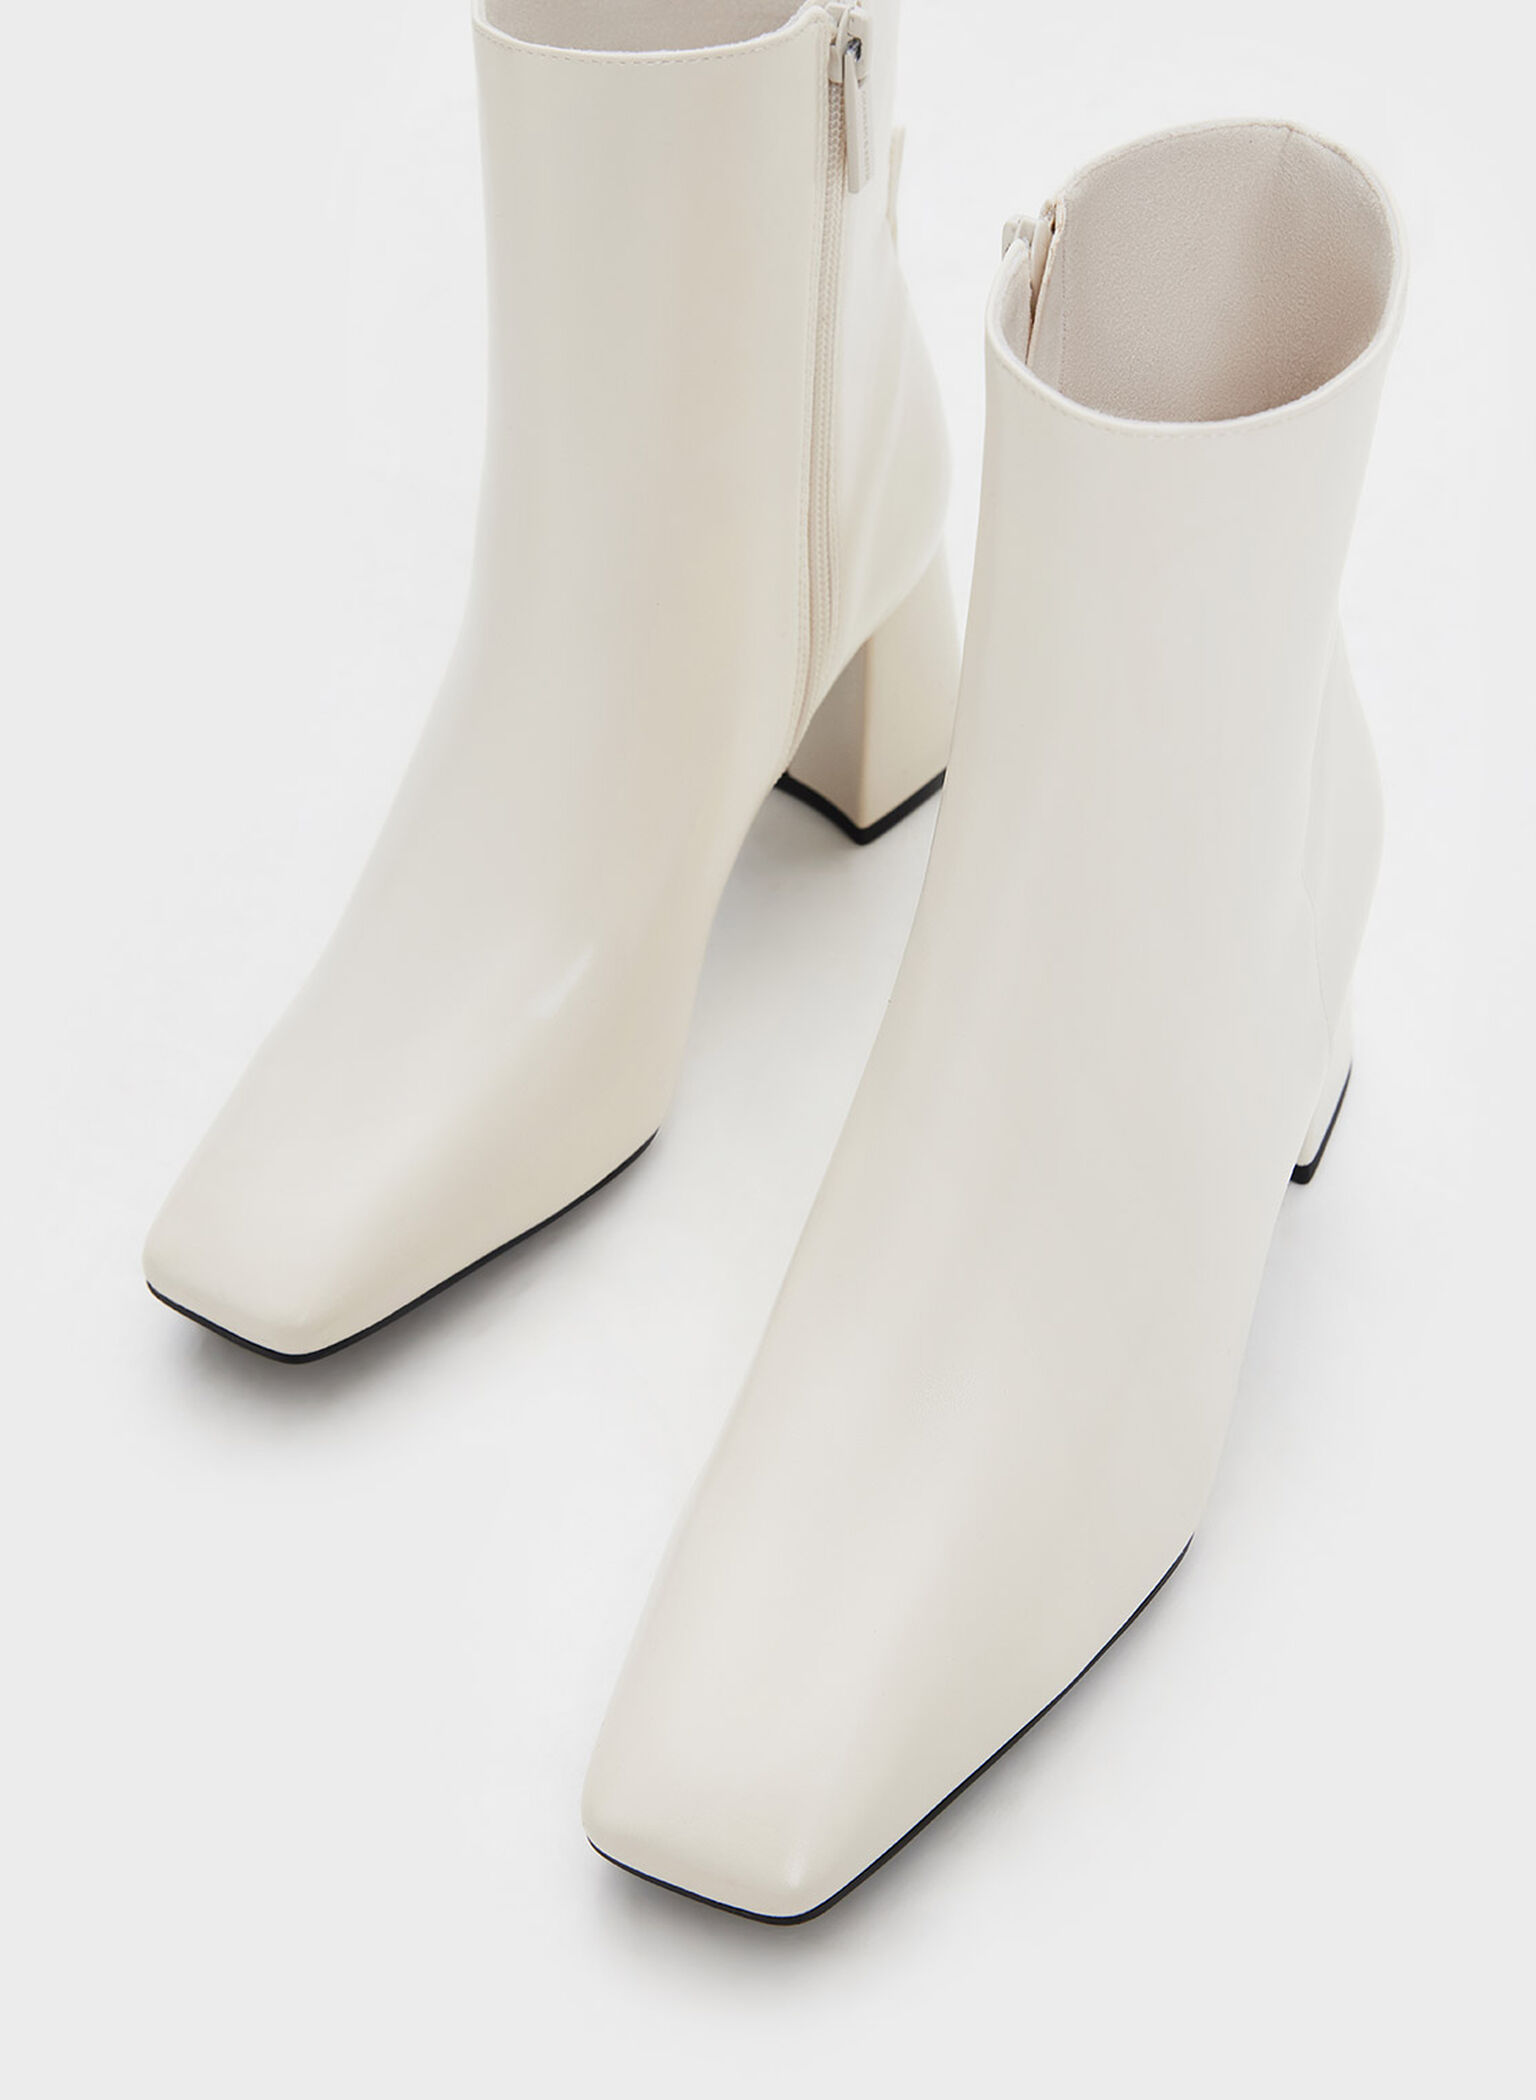 Curved Block Heel Ankle Boots, Chalk, hi-res